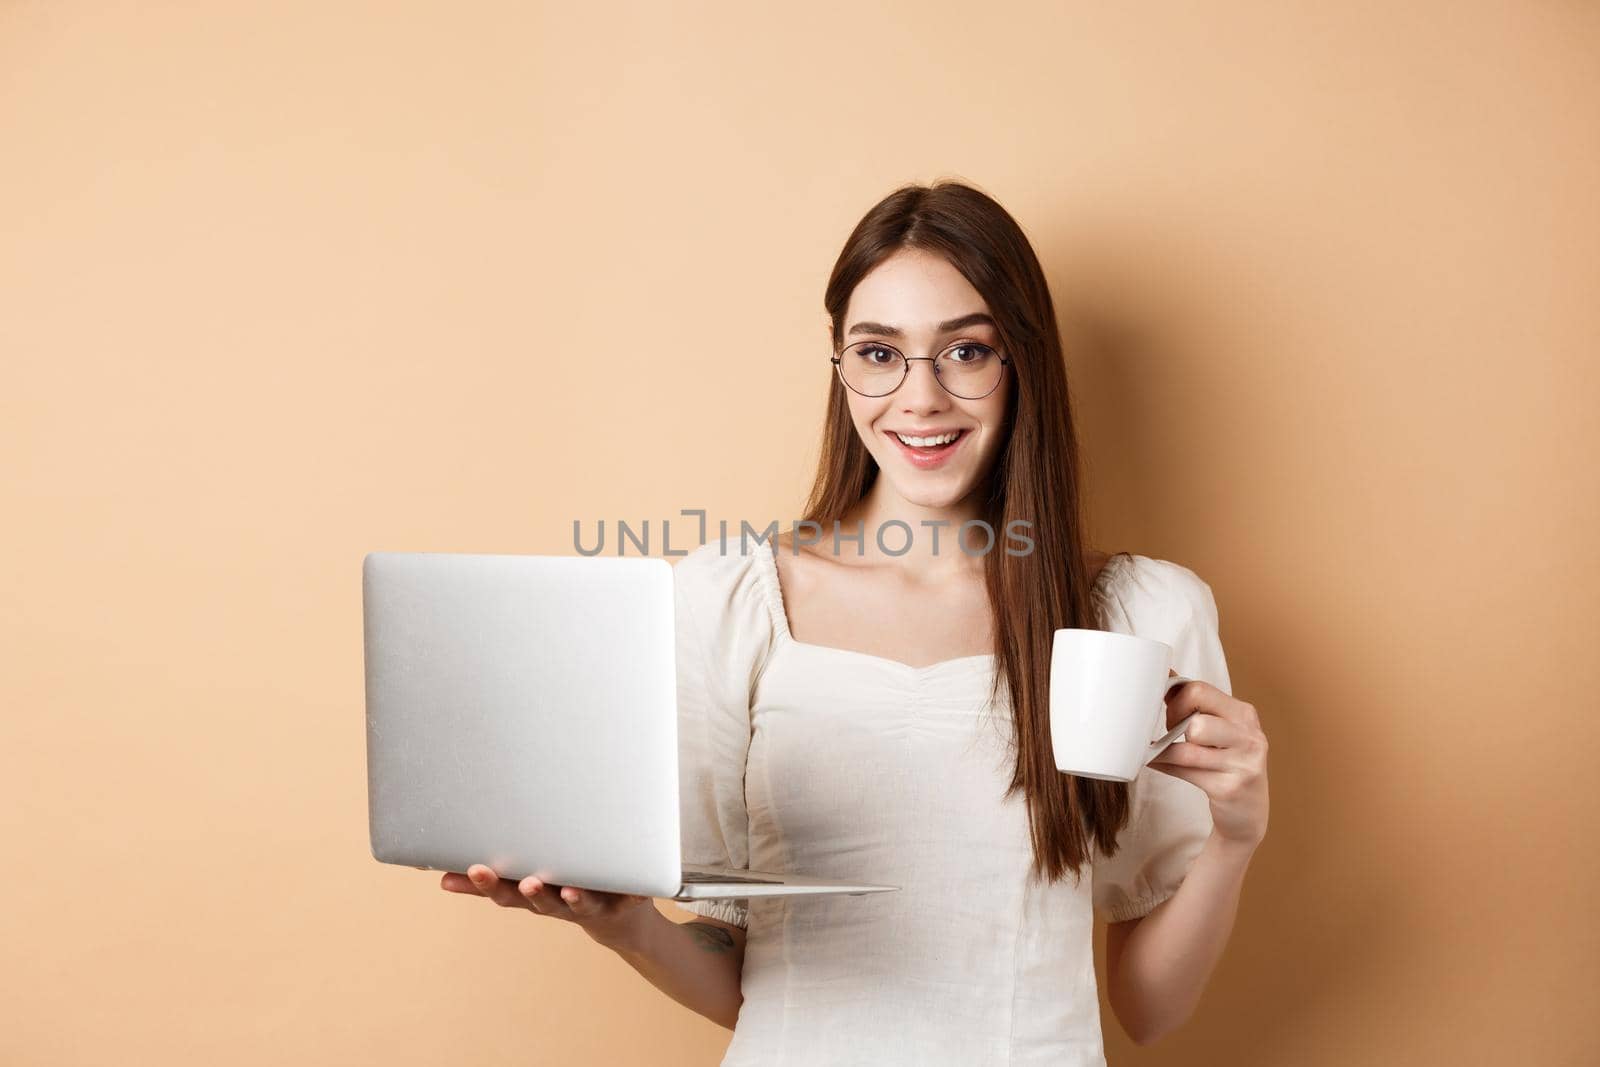 Cheerful woman in glasses drinking coffee and working on laptop, smiling at camera, standing on beige background.